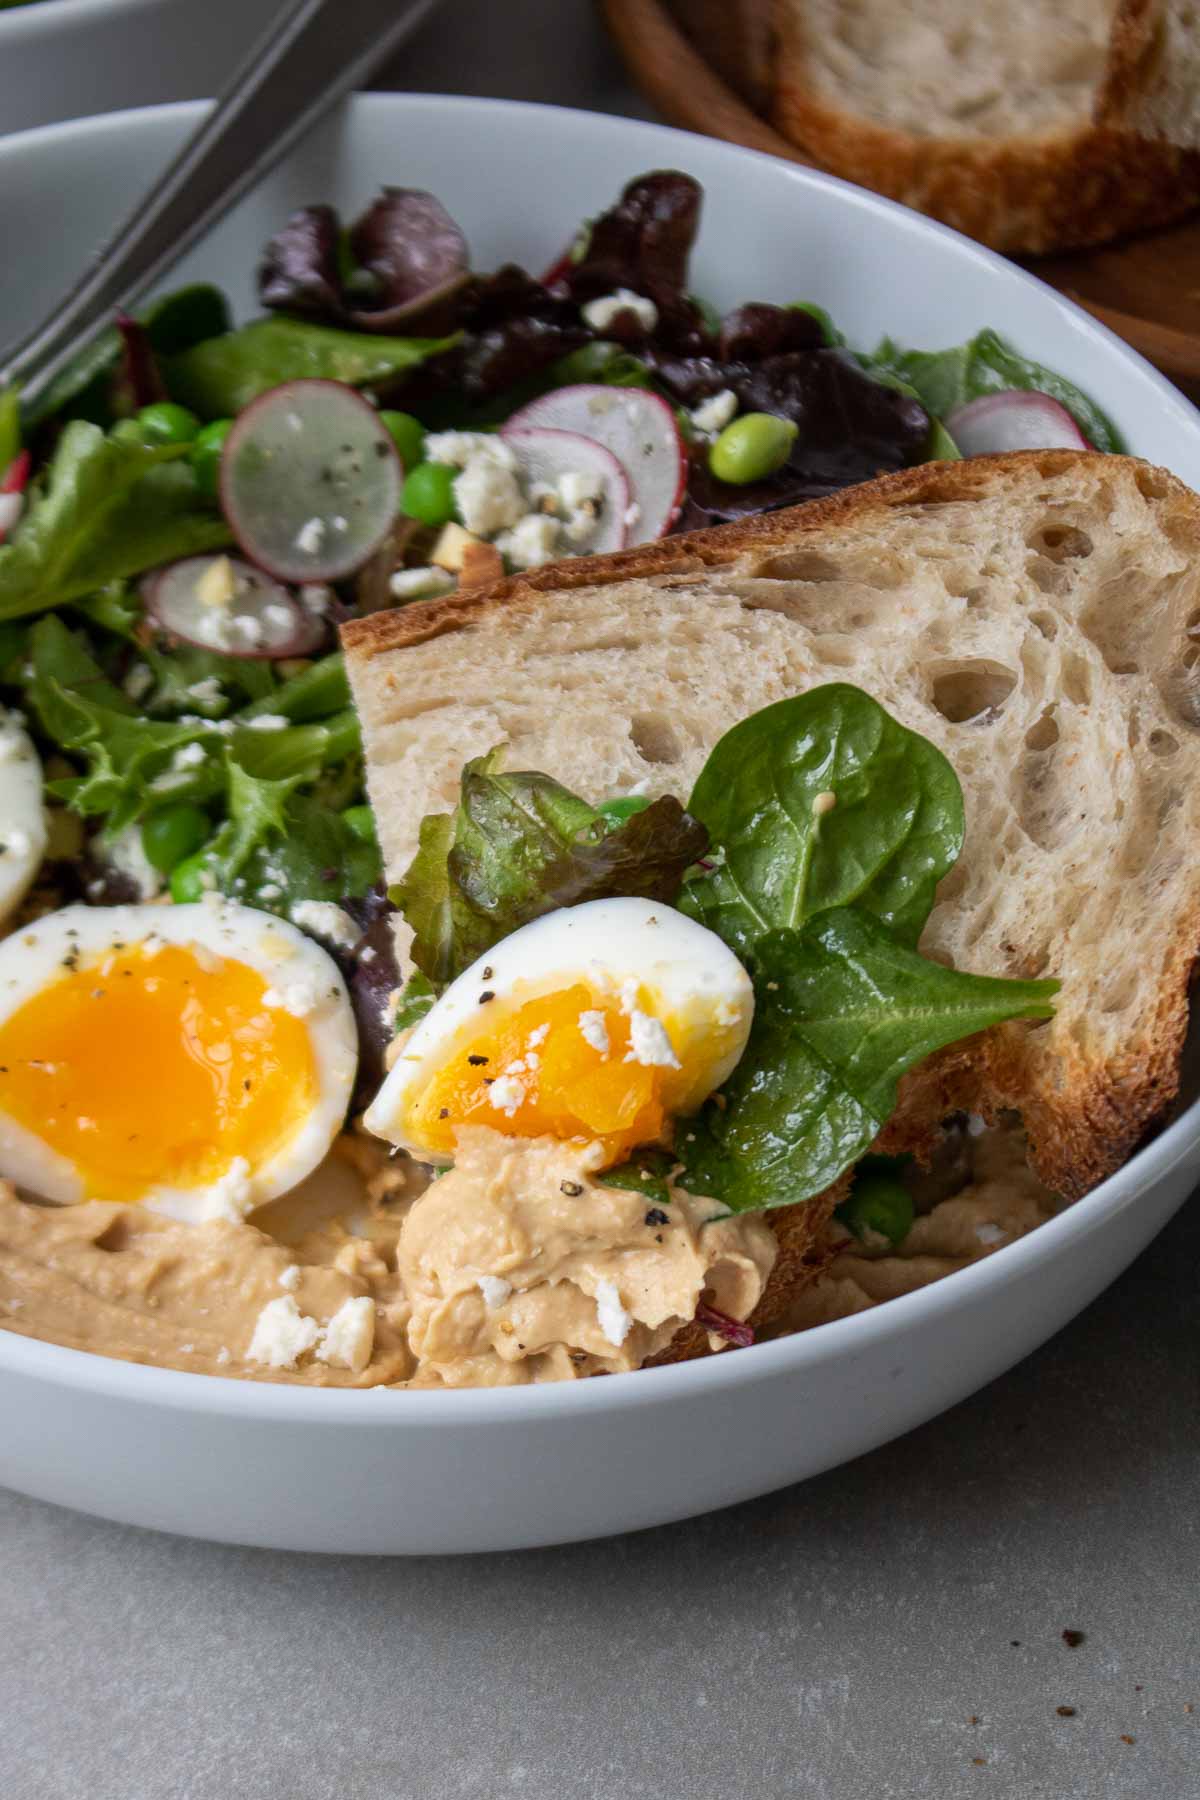 Close up of slice of bread in a bowl with some leafy greens, hummus, and a piece of boiled egg on the bread.